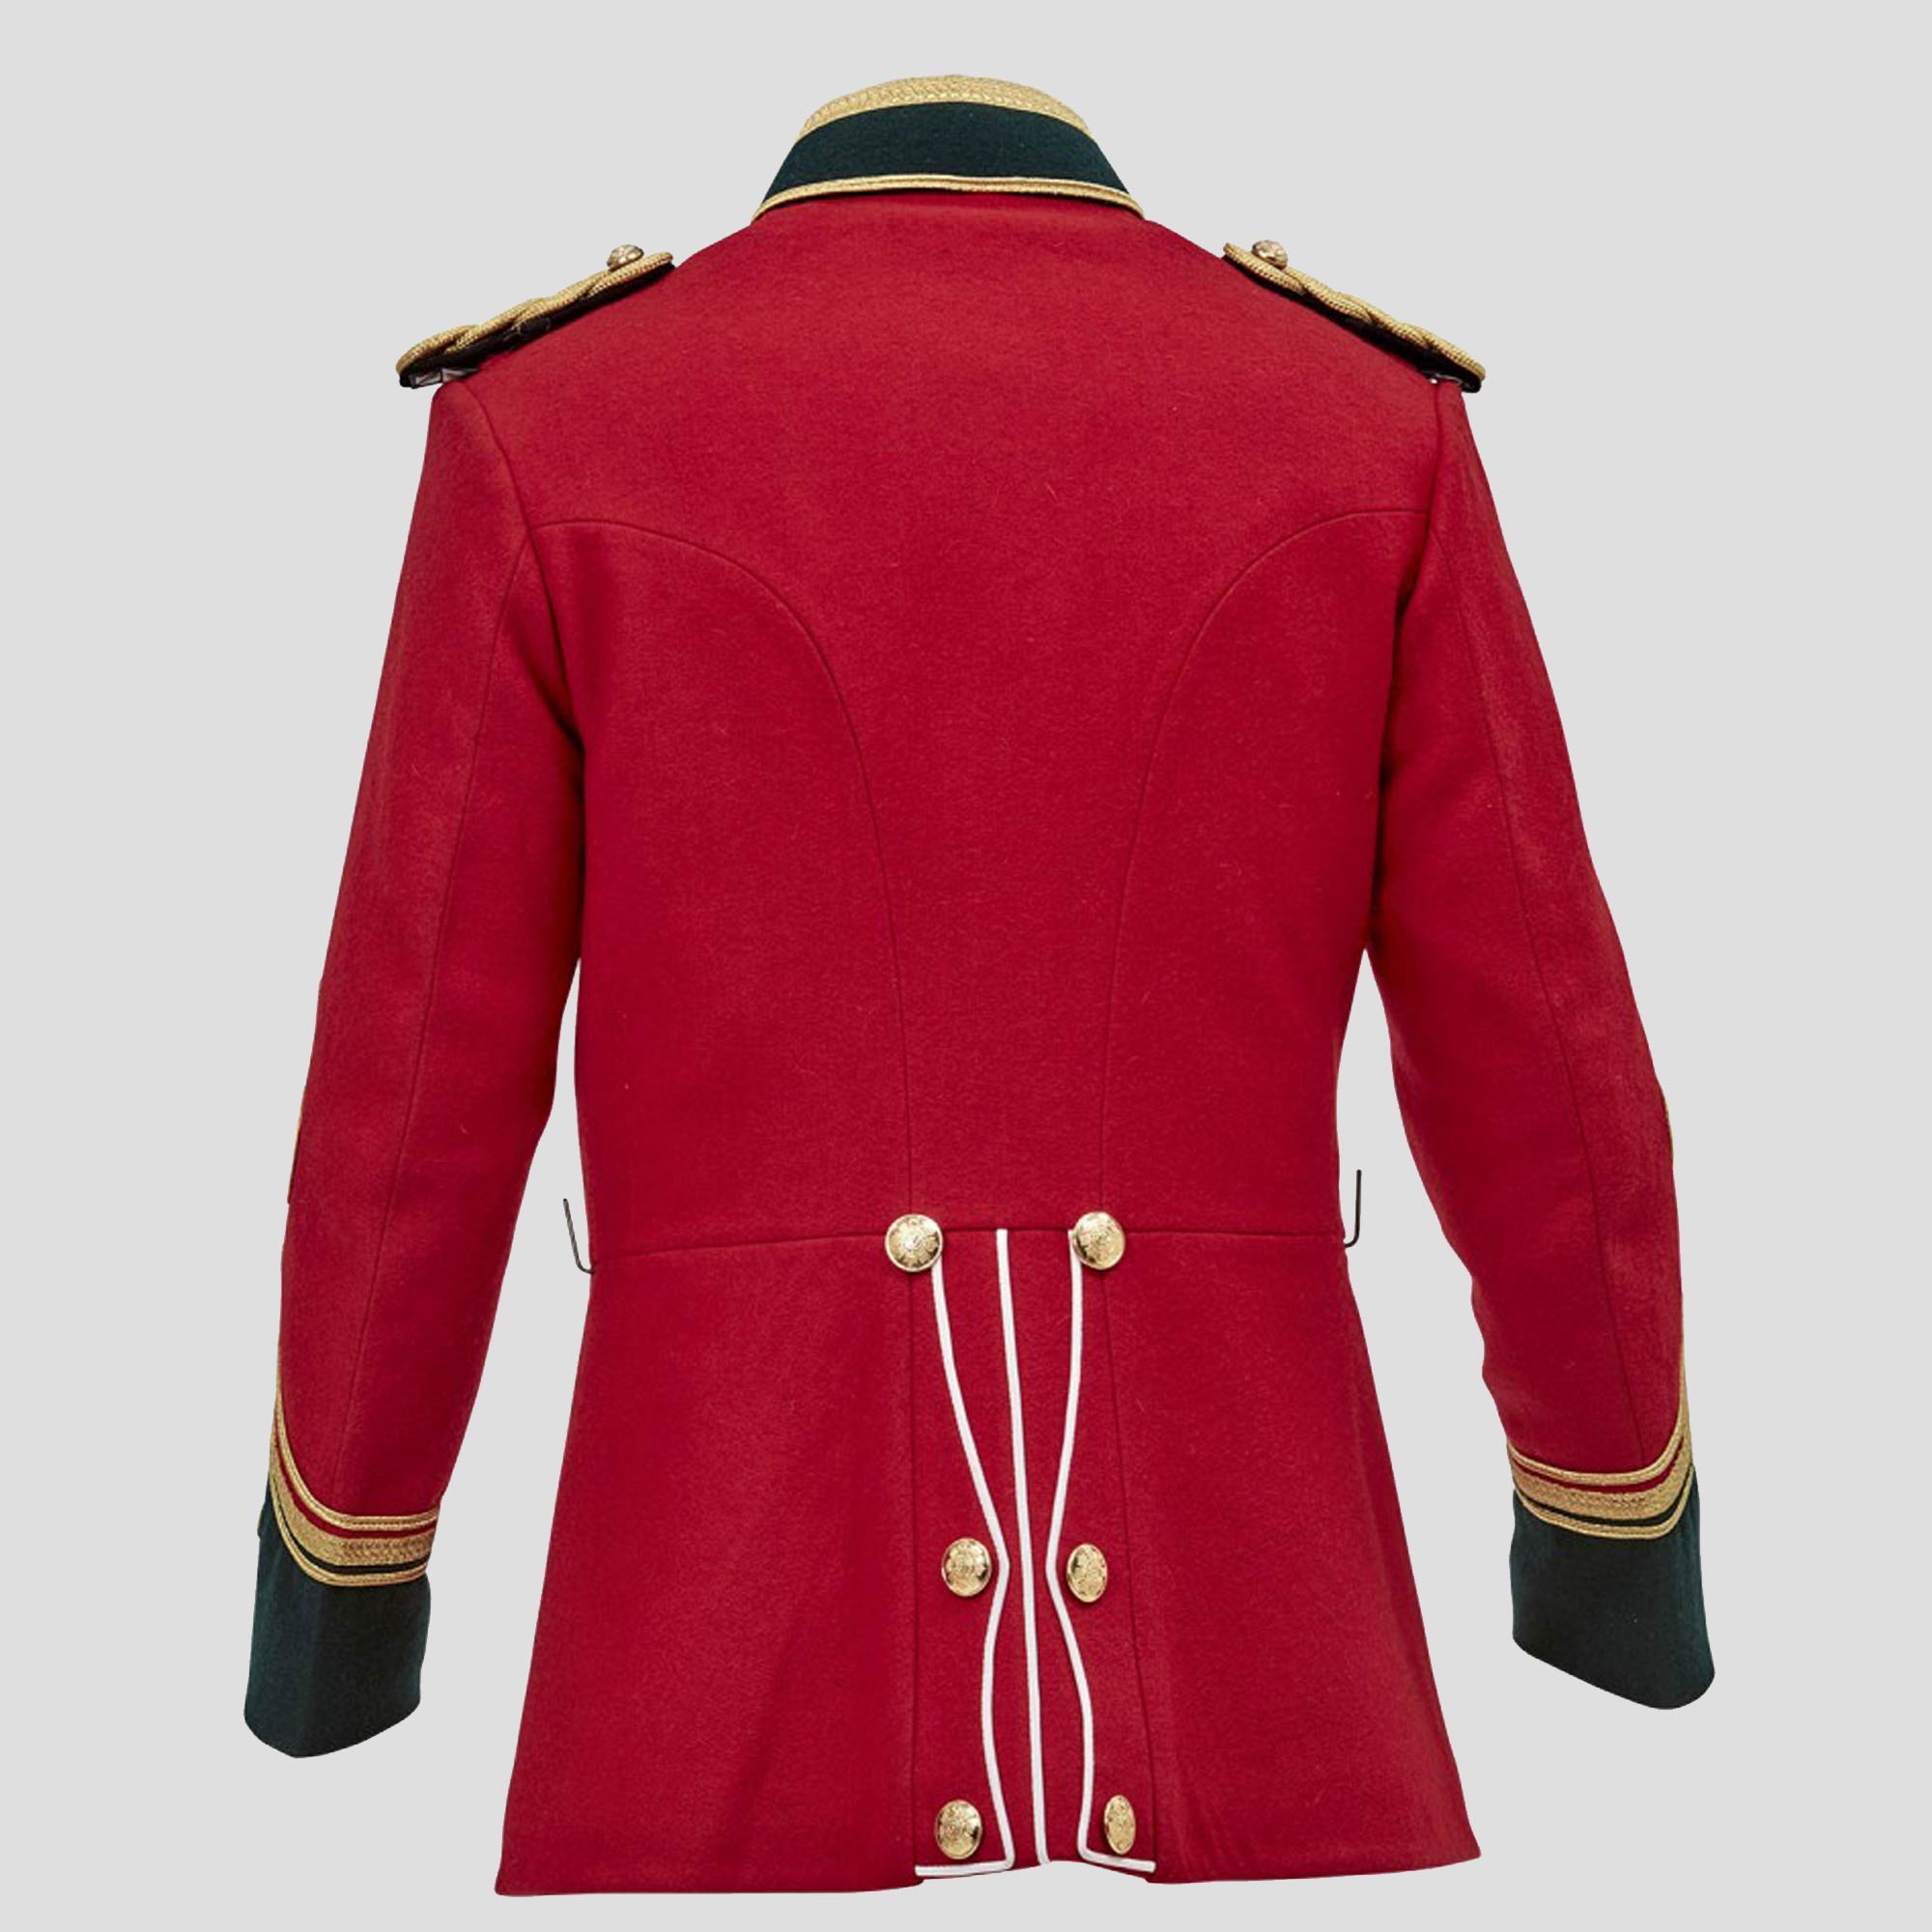 1879 British Anglo-Zulu War Officers Tunic: A Symbol of British Military History